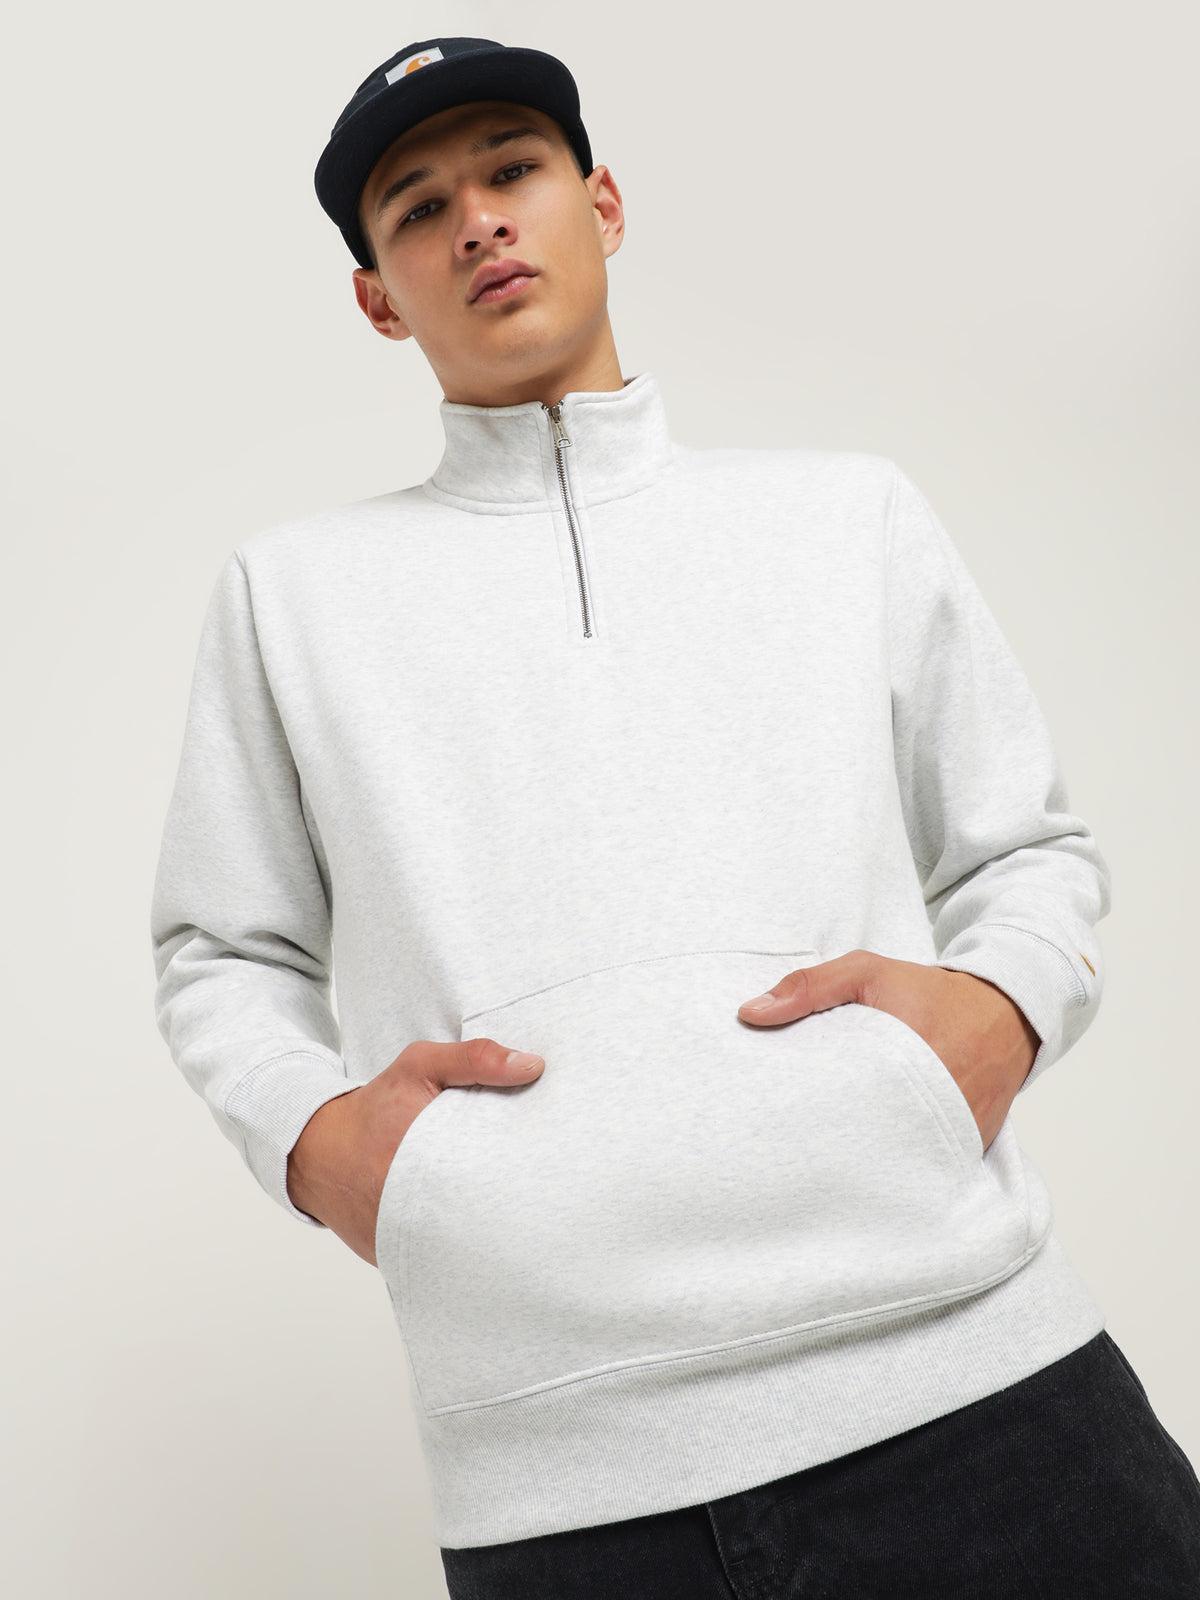 Chase Neck Zip Sweater in Grey